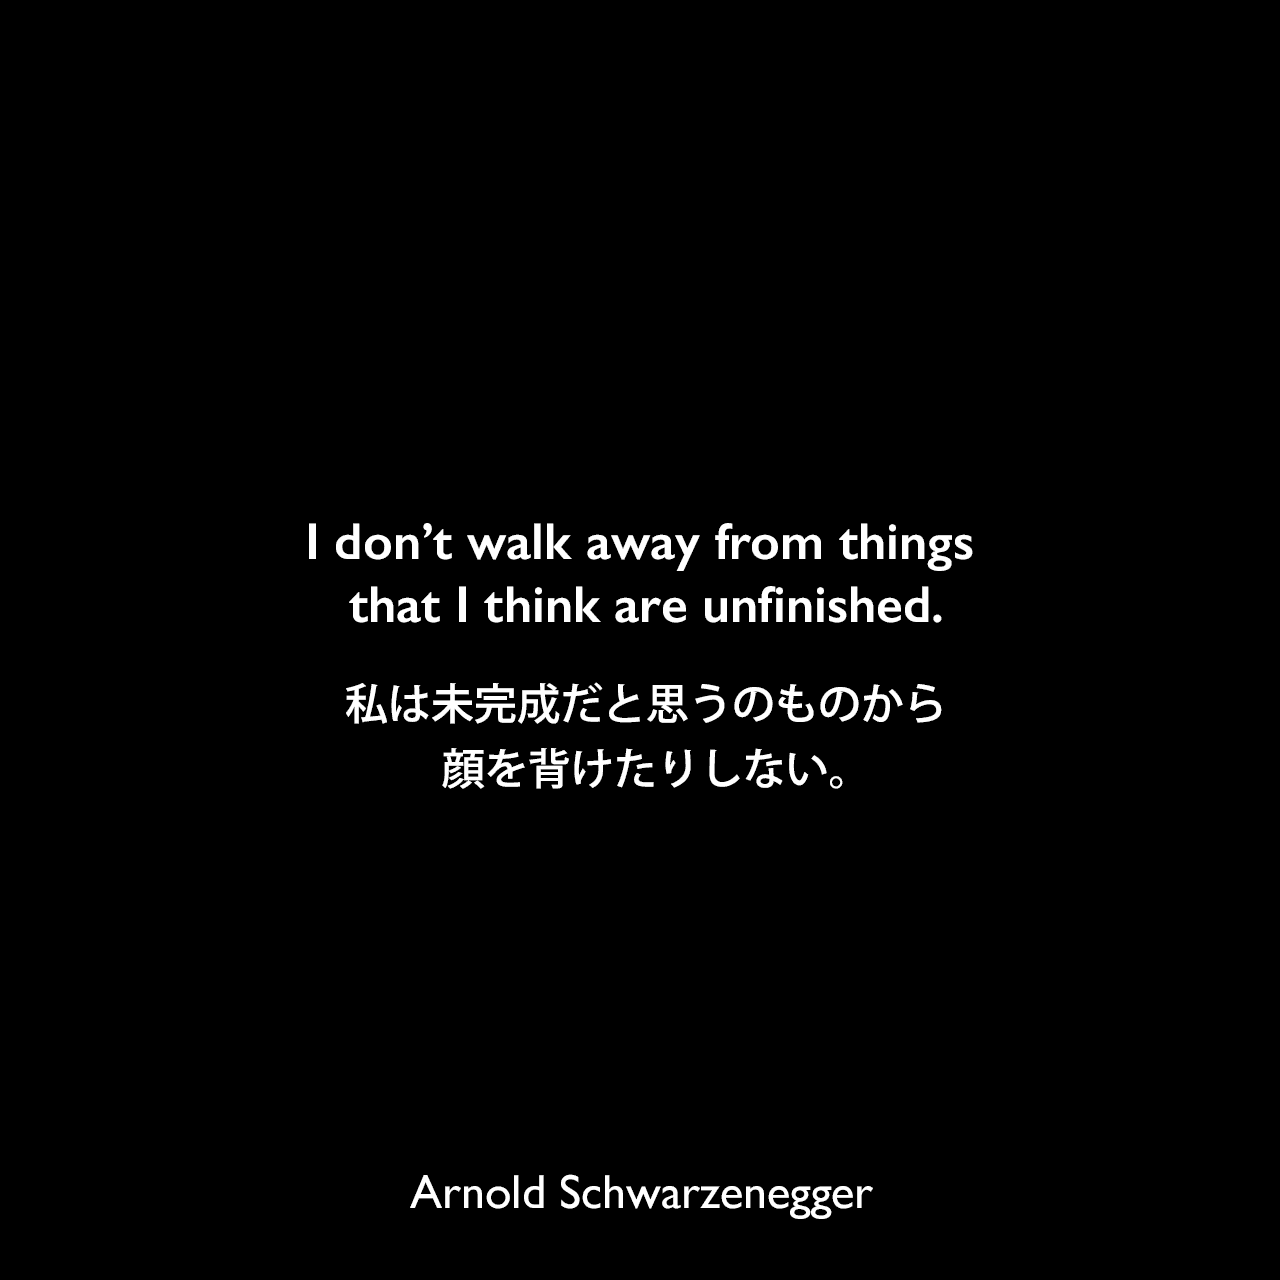 I don’t walk away from things that I think are unfinished.私は未完成だと思うのものから顔を背けたりしない。Arnold Schwarzenegger